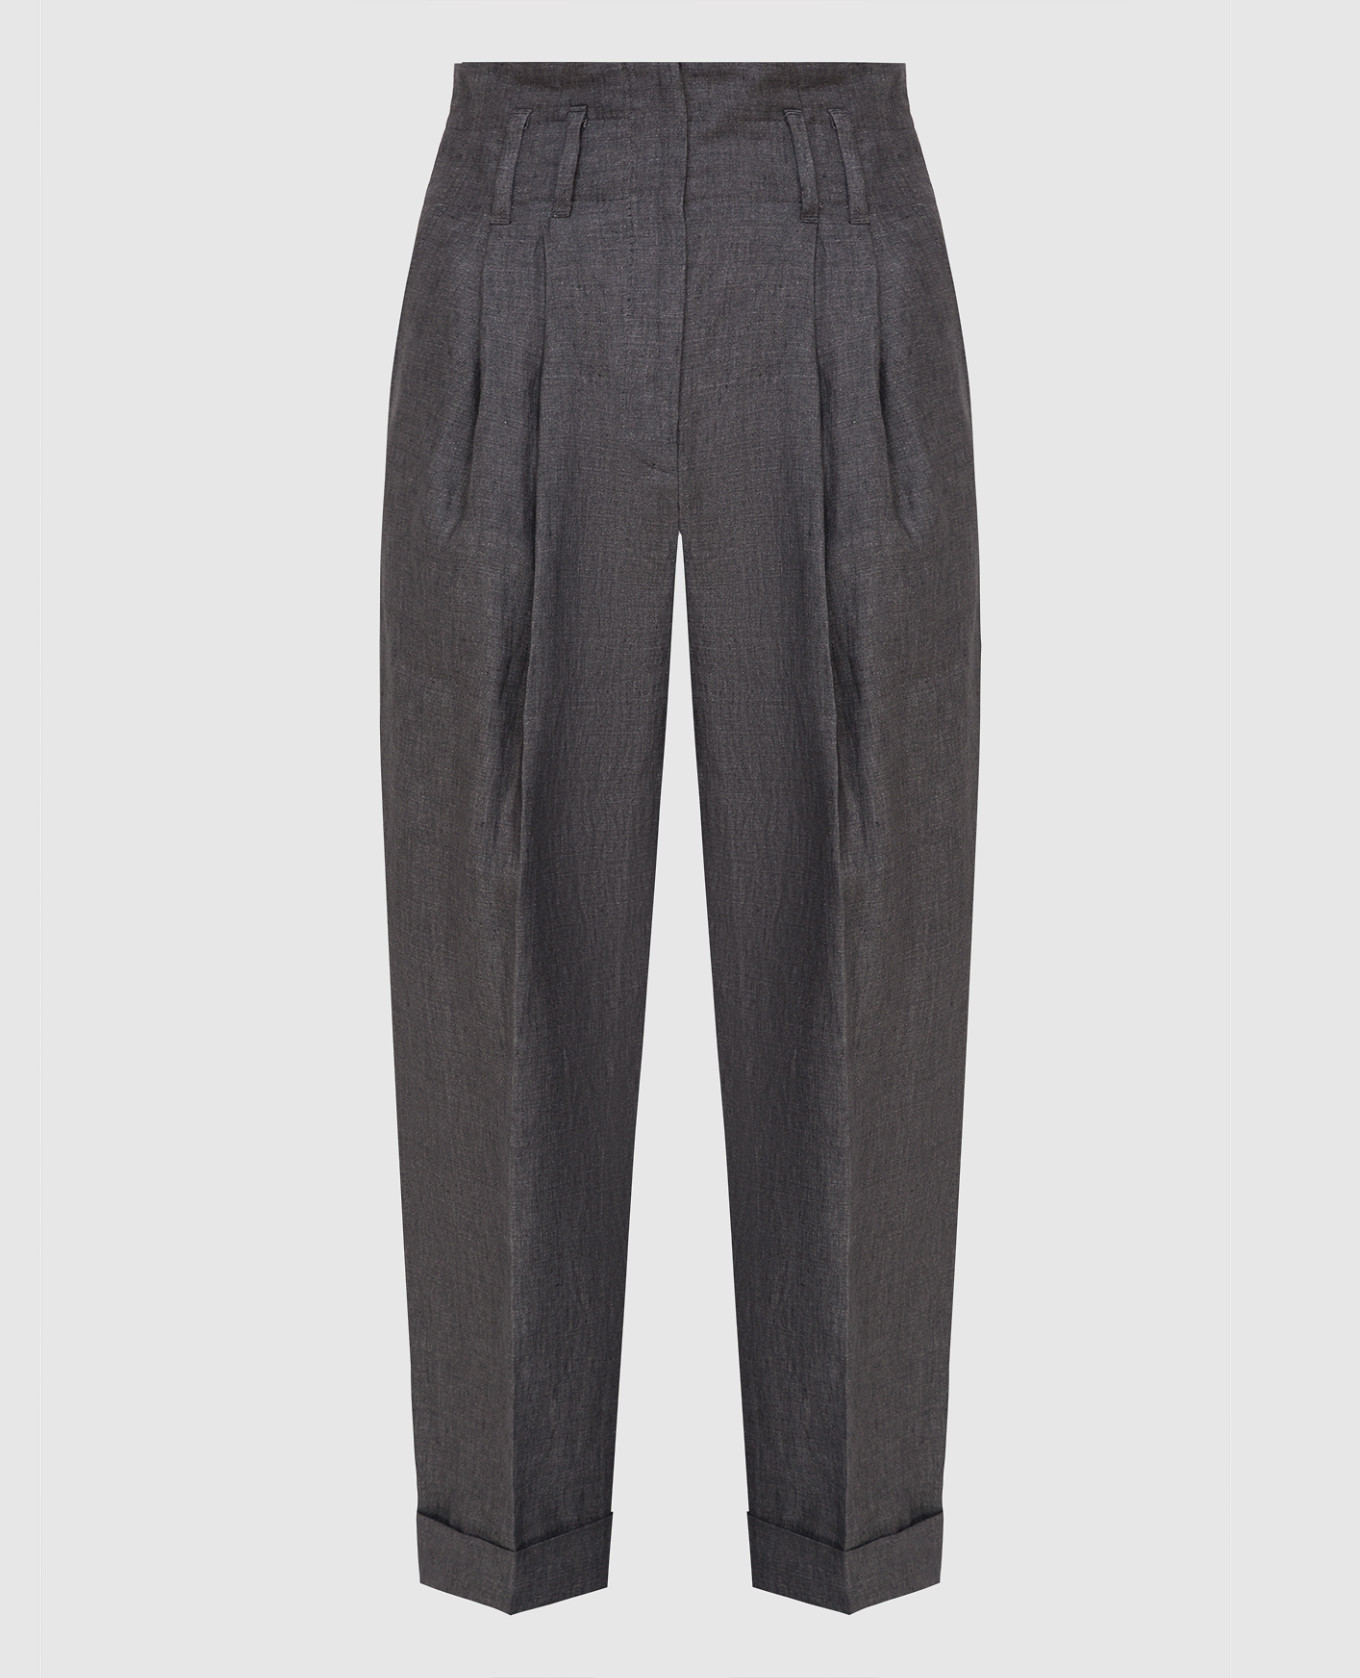 Charcoal linen trousers